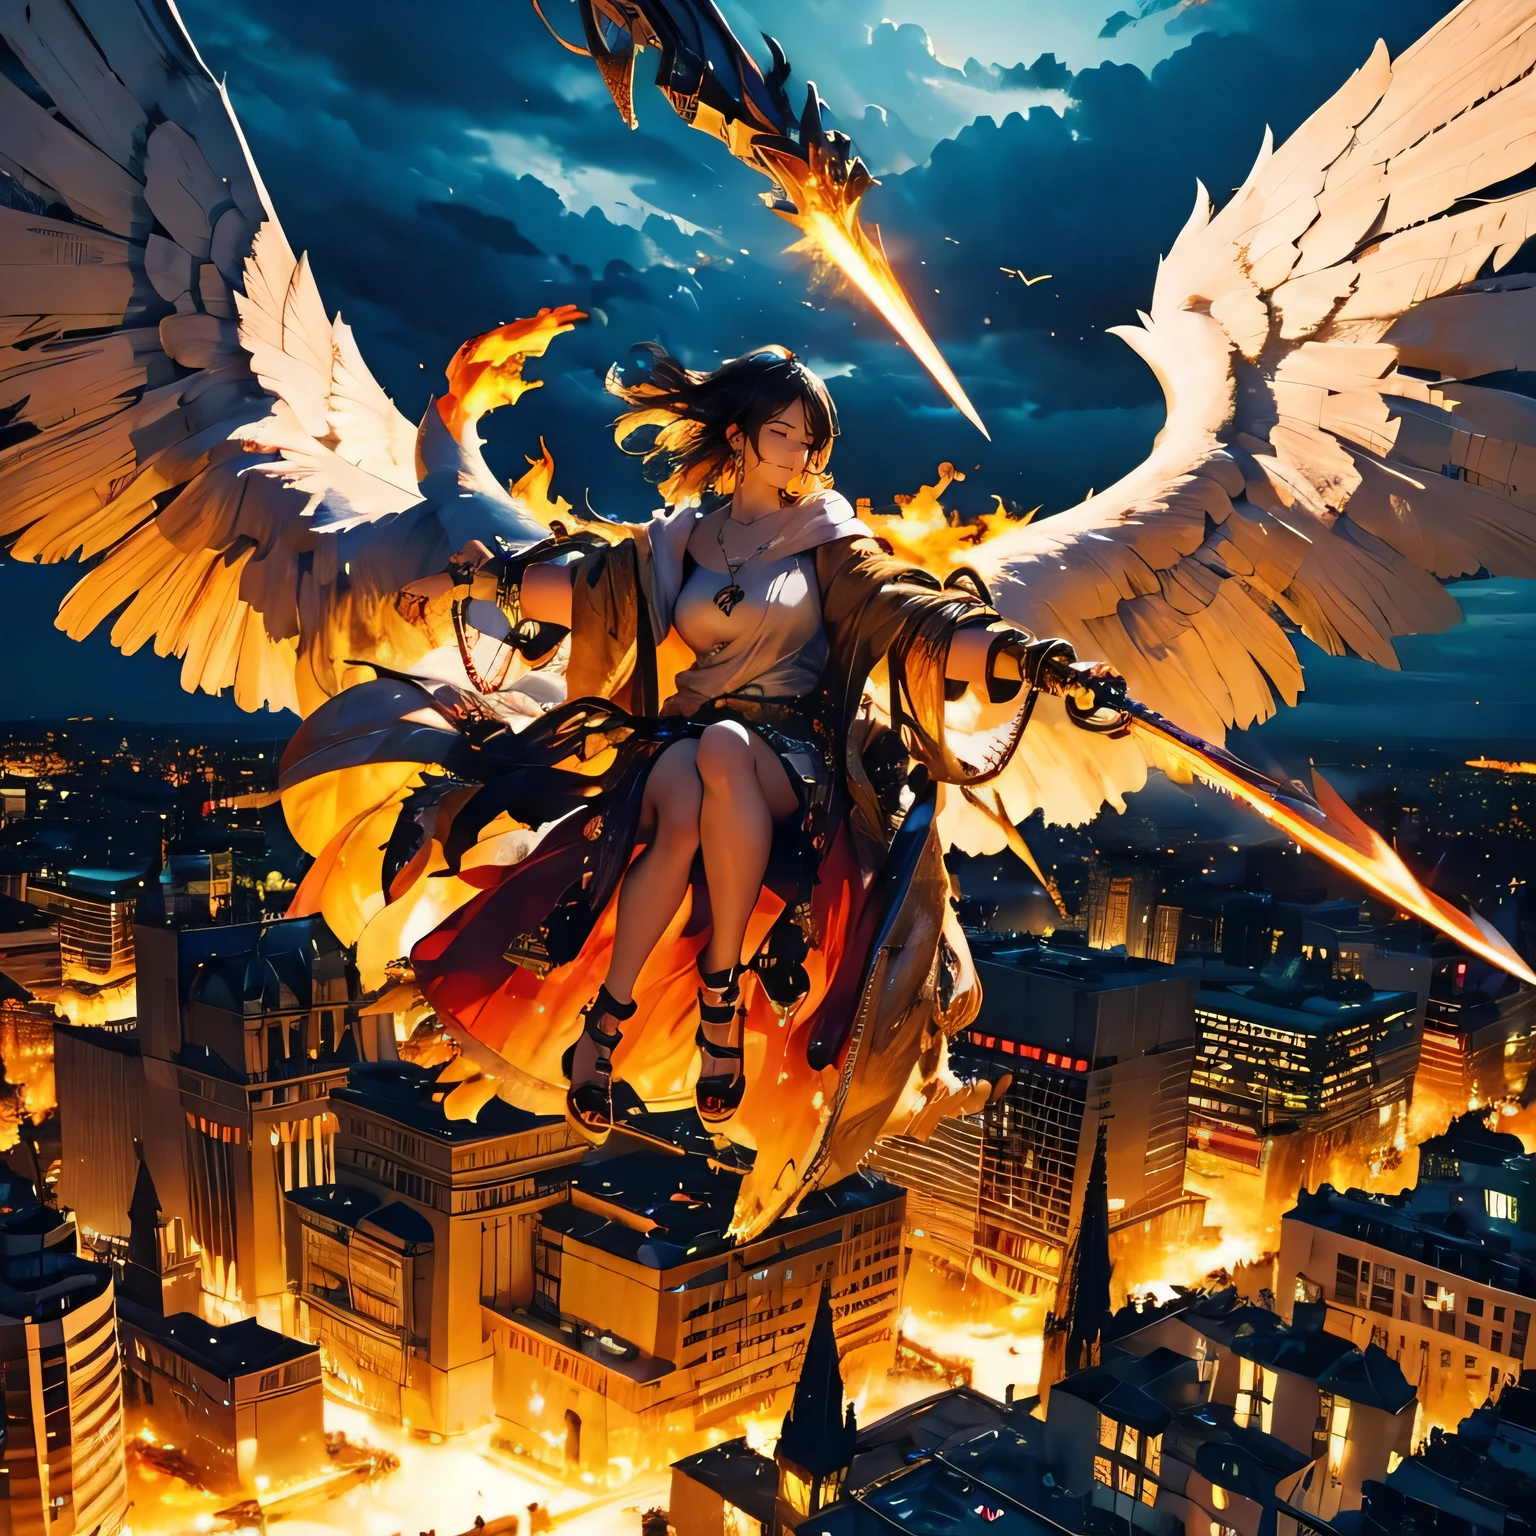 (mechanical), thunderstorm, having sword on fire, necklace on fire, (apocalypse), (flying above the city), huge angel, in the city, huge fire looks like wings, drooping eyes, sleepy,